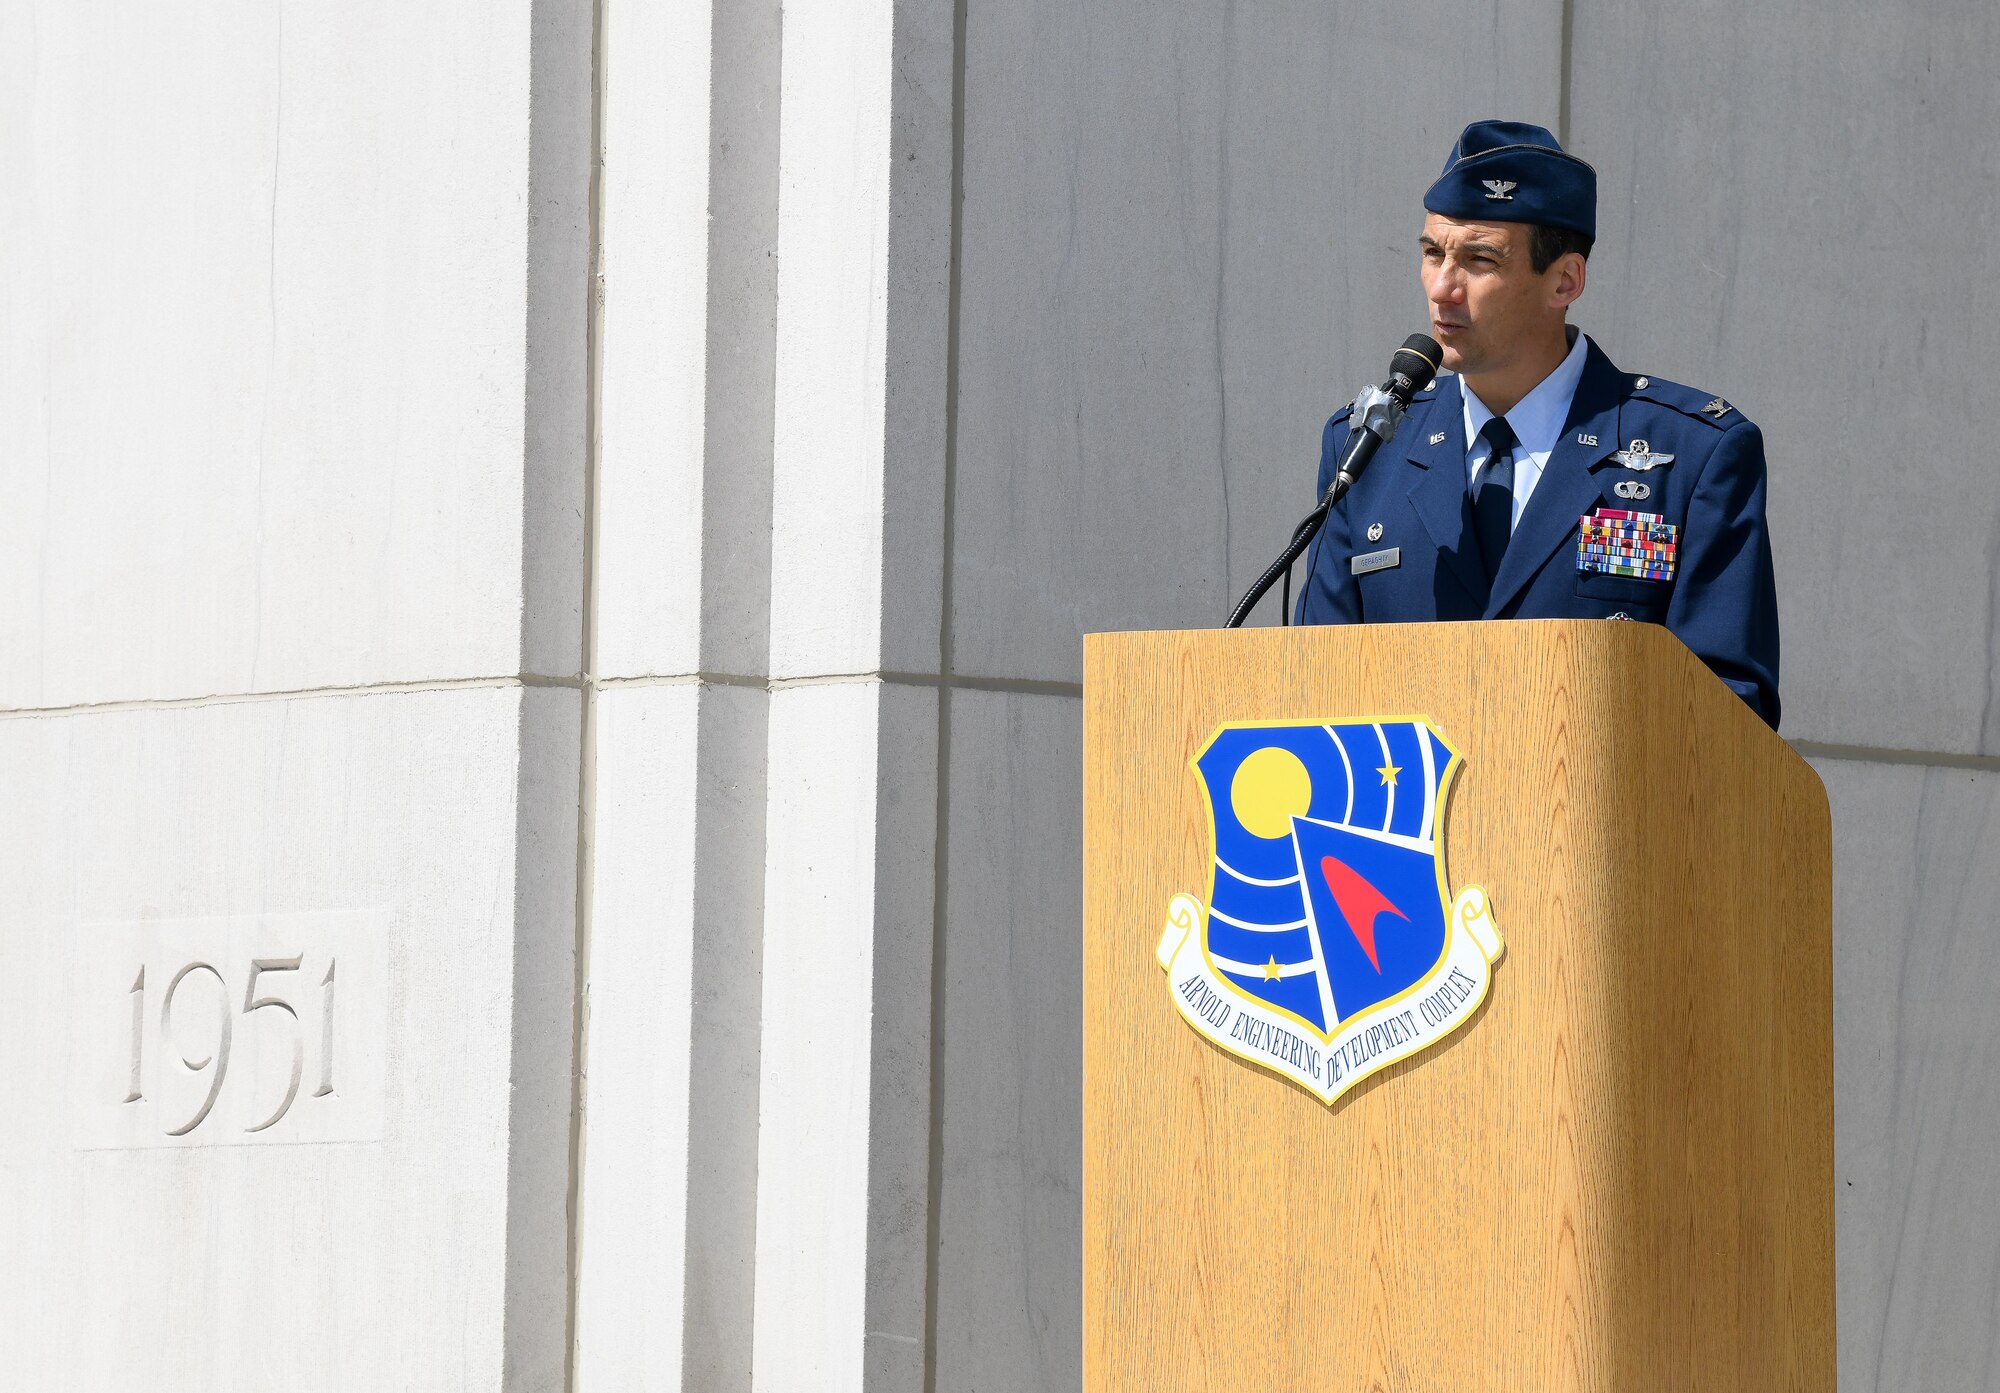 Col. Jeffrey Geraghty, AEDC commander, makes remarks during the activation Ceremony for the 804th Test Group, the 716th Test Squadron, 717th Test Squadron, 718th Test Squadron and 804th Test Support Squadron at Arnold Air Force Base, Tenn., May 20, 2022.